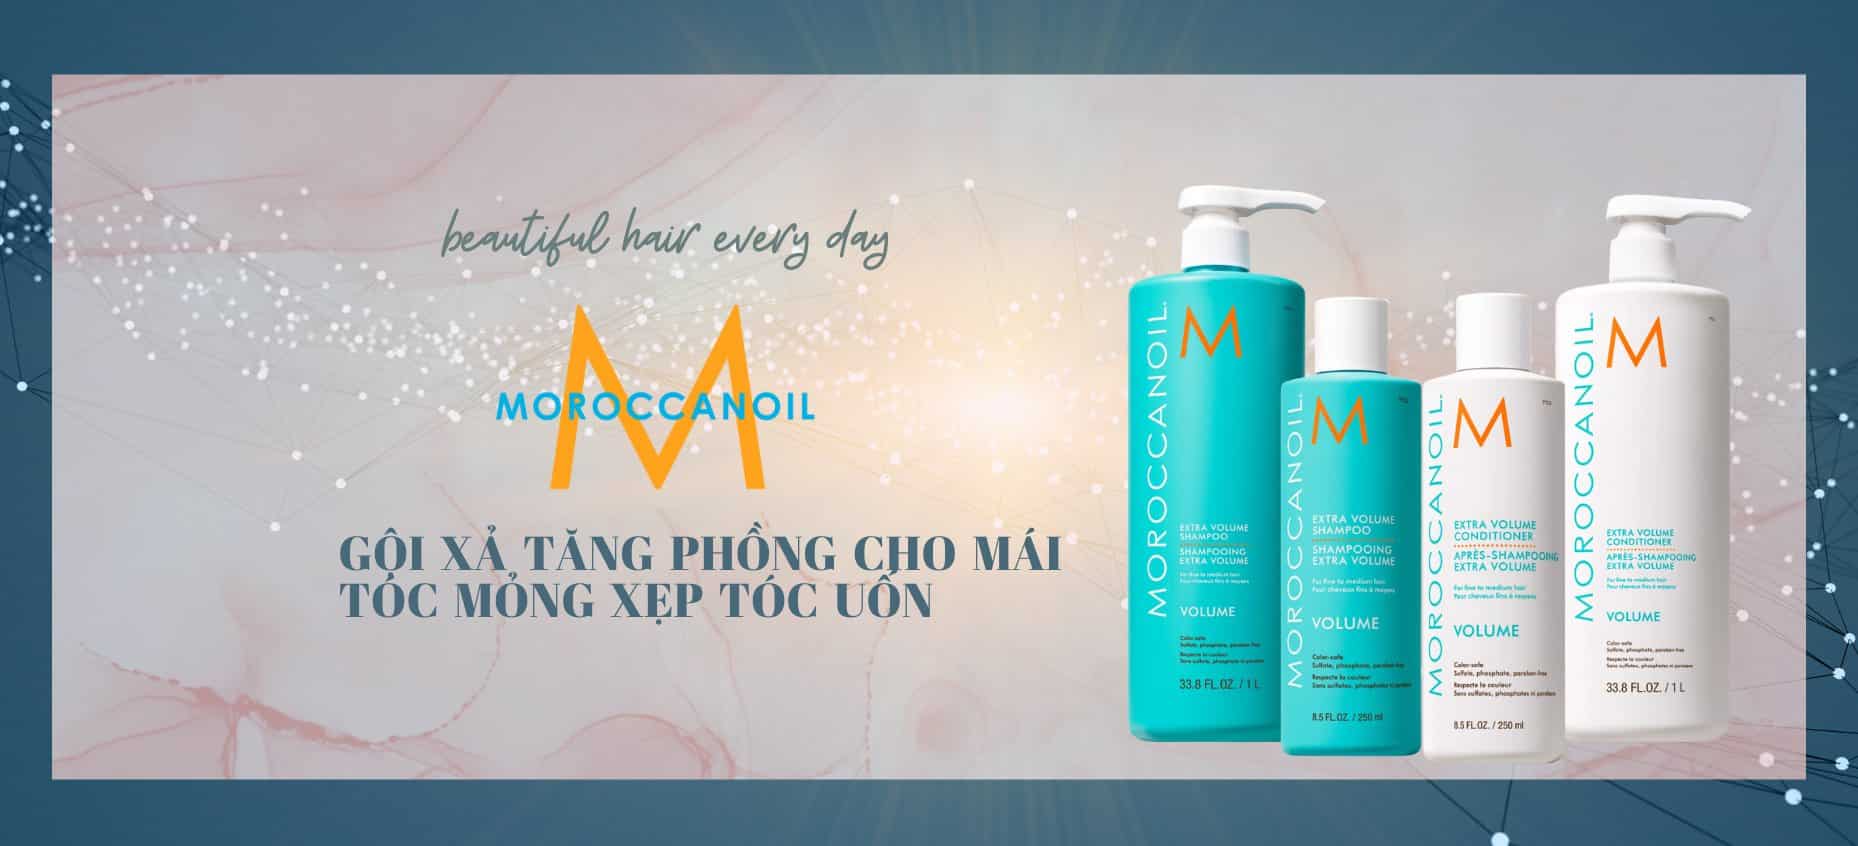 review-dong-san-pham-moroccanoil